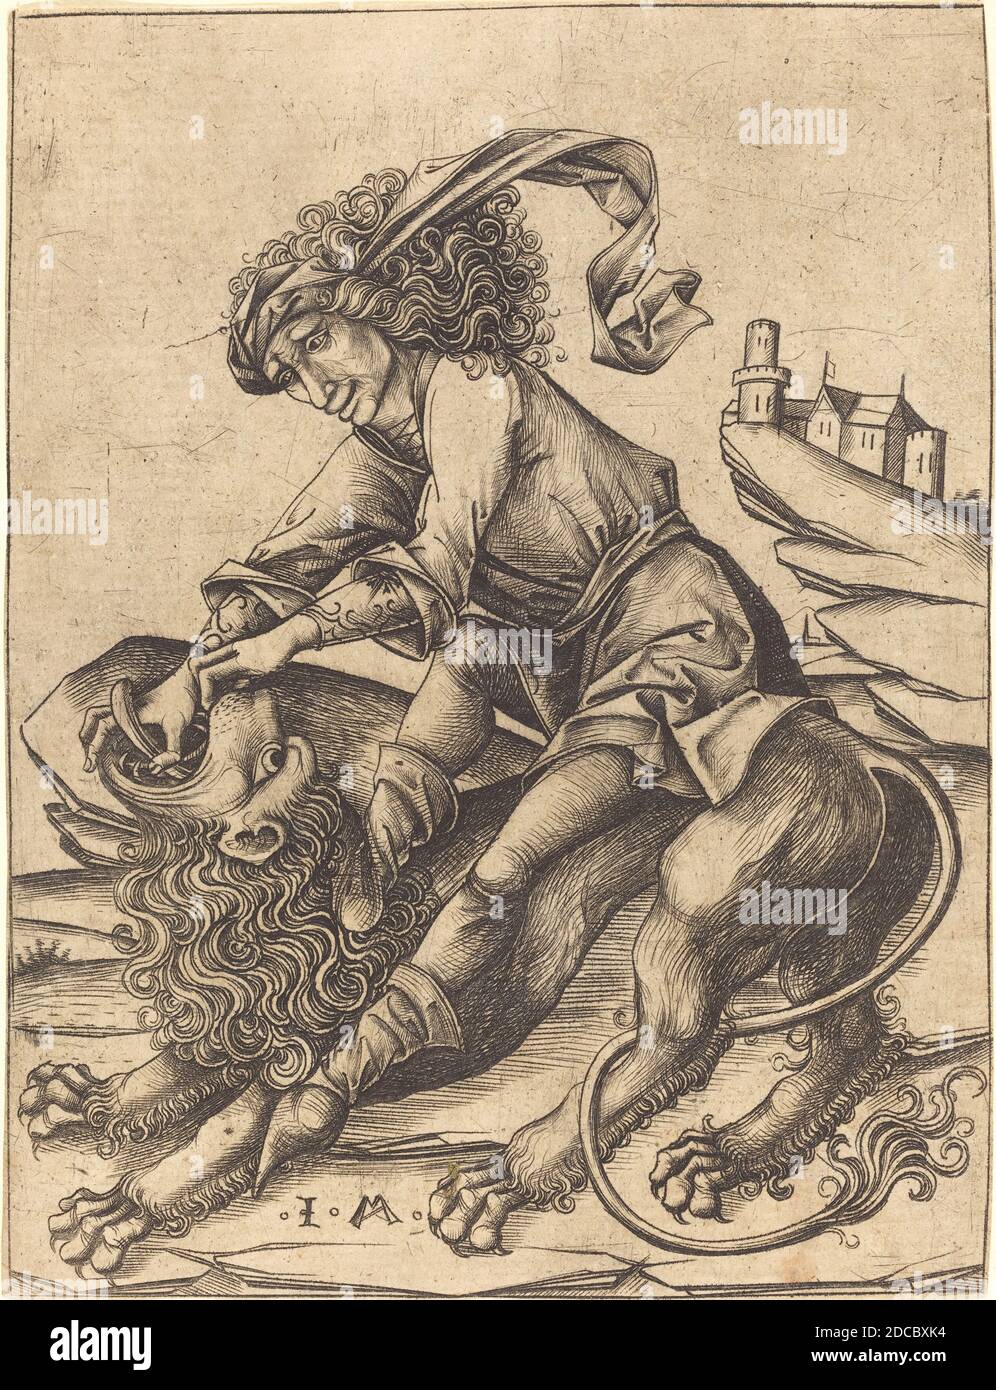 Israhel van Meckenem, (artist), German, c. 1445 - 1503, Samson and the Lion, c. 1475, engraving, sheet (trimmed to plate mark): 13.7 x 10.5 cm (5 3/8 x 4 1/8 in Stock Photo